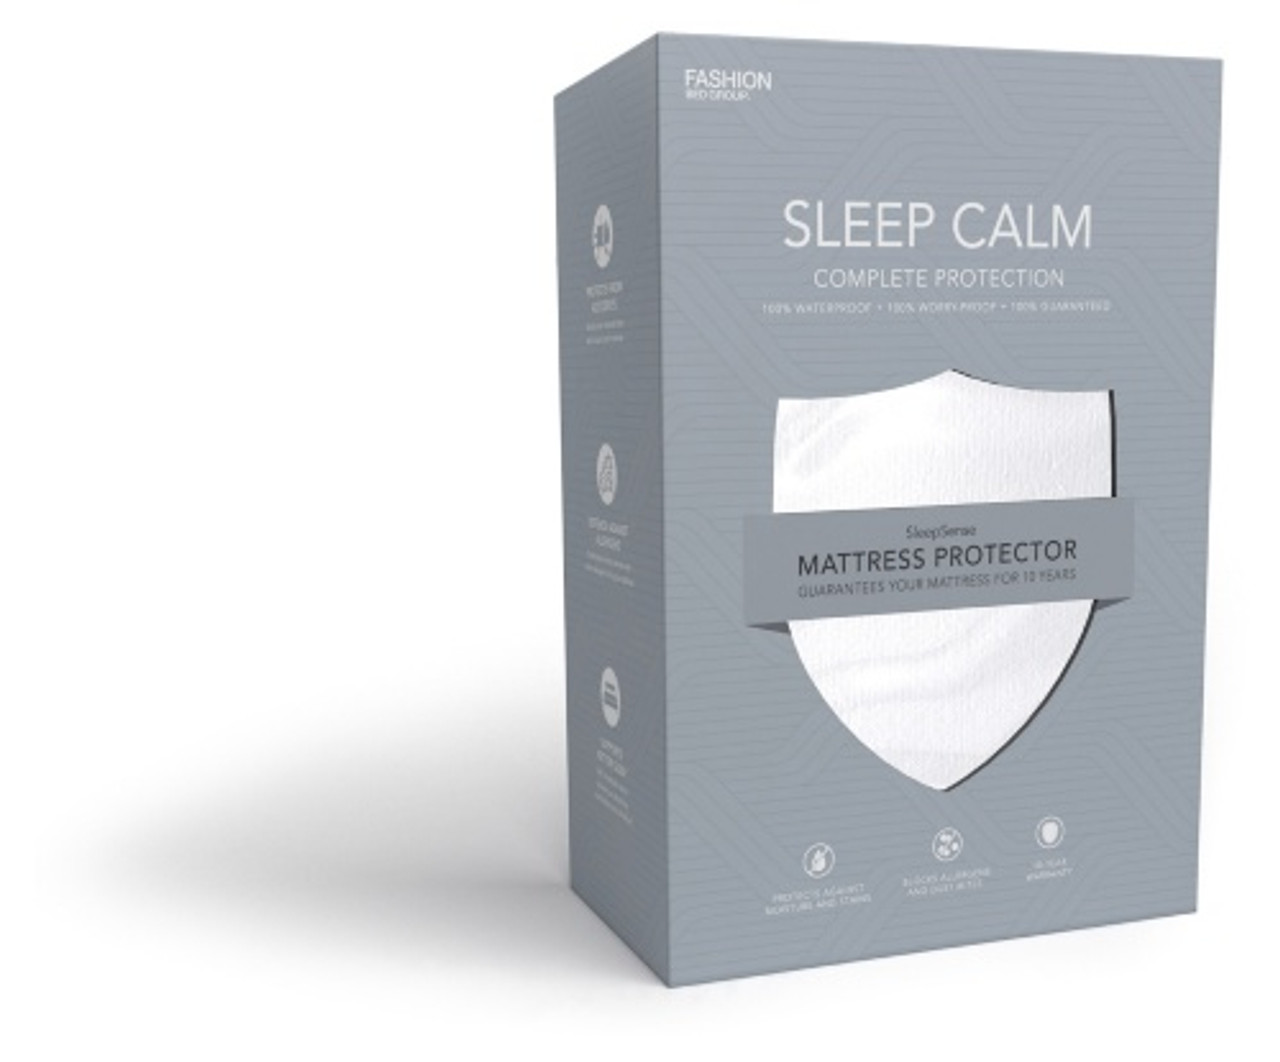 Best 83+ Impressive sleep calm mattress protector You Won't Be Disappointed